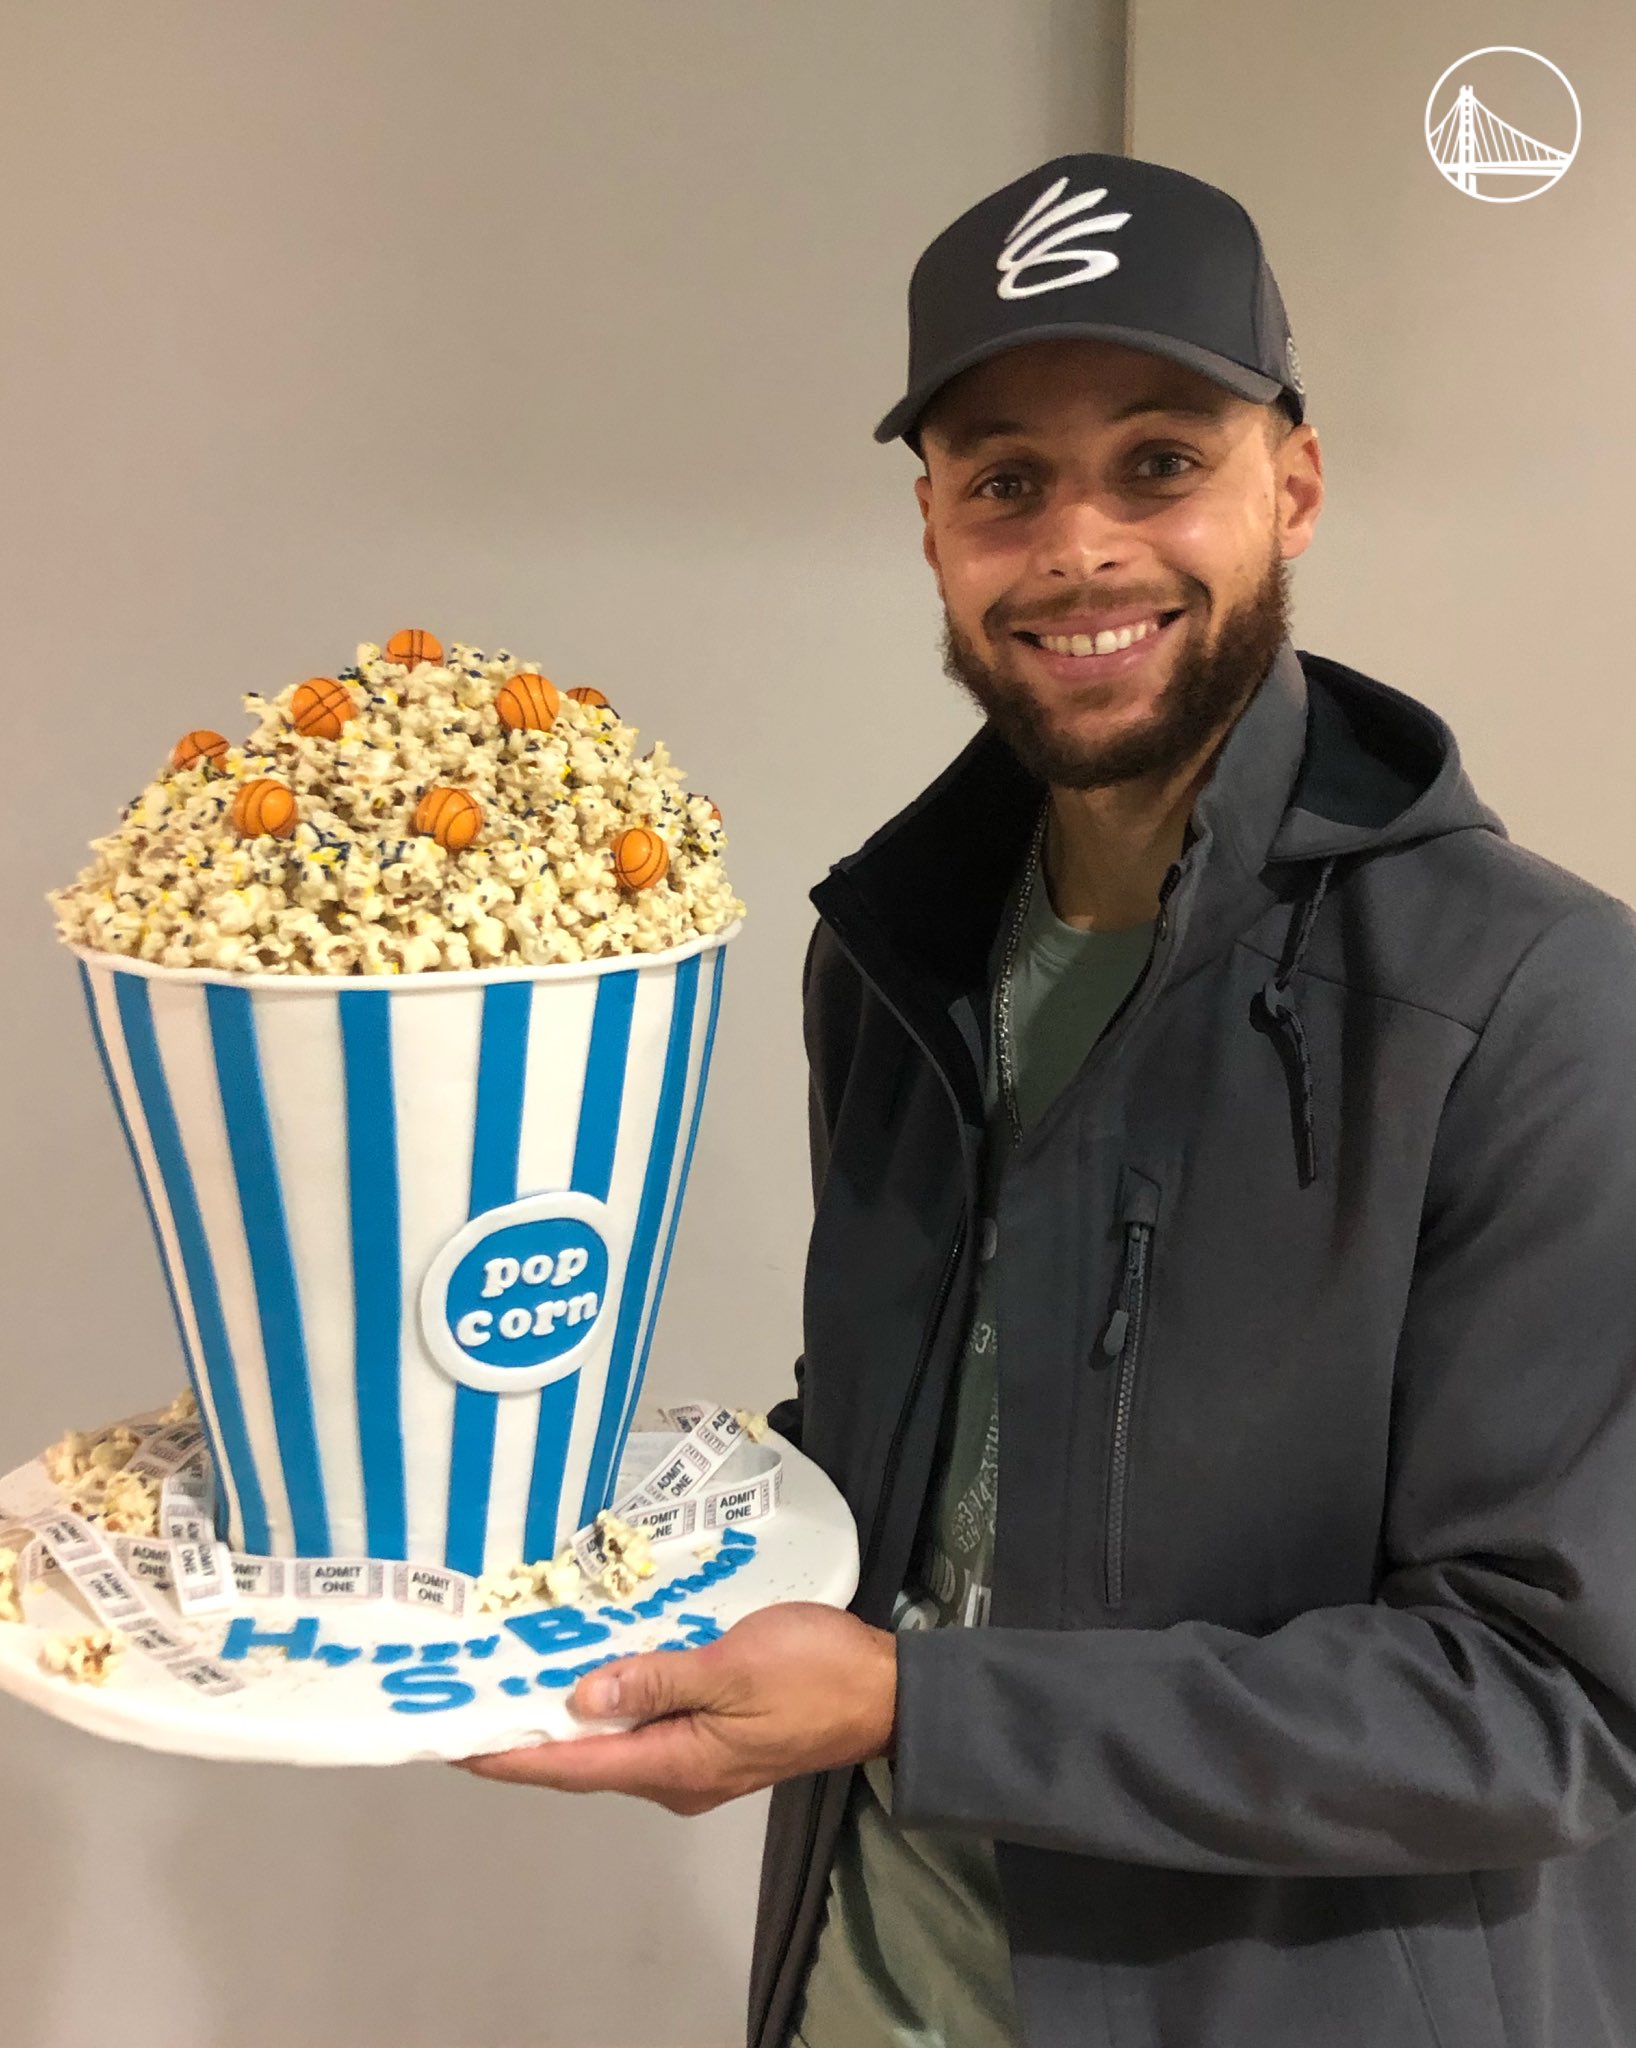 Golden State Warriors Star Steph Curry Honored With Popcorn Cake - Eater SF  - radiozona.com.ar